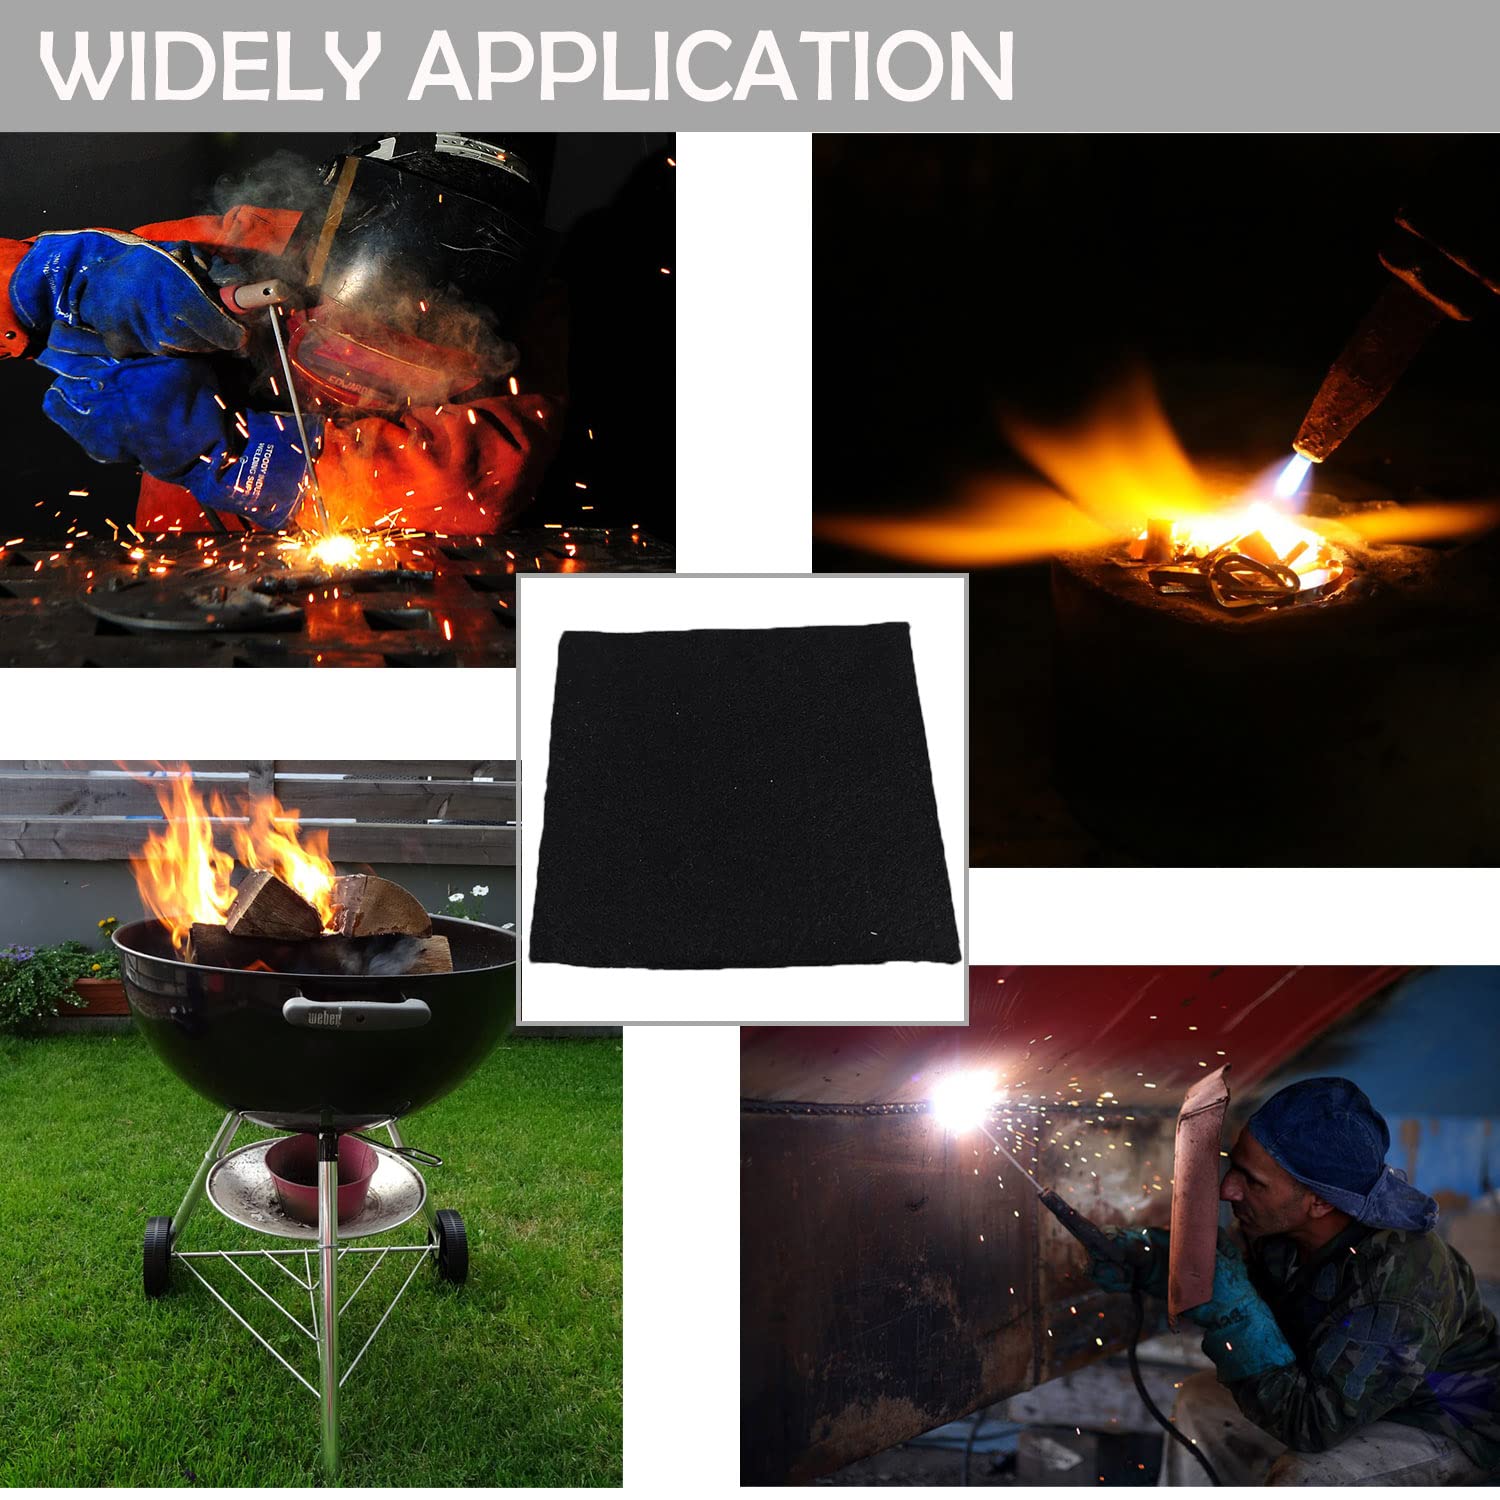 Fireproof Welding Blanket Heat Resistant Carbon Felt Fabric Flame for Smoker Gill Heat Resistant Up to 1800°F 36” x 36” Easy Cut Fire Proof Mat for Glass Blowing Auto Body Repair Camp and Wood stoves